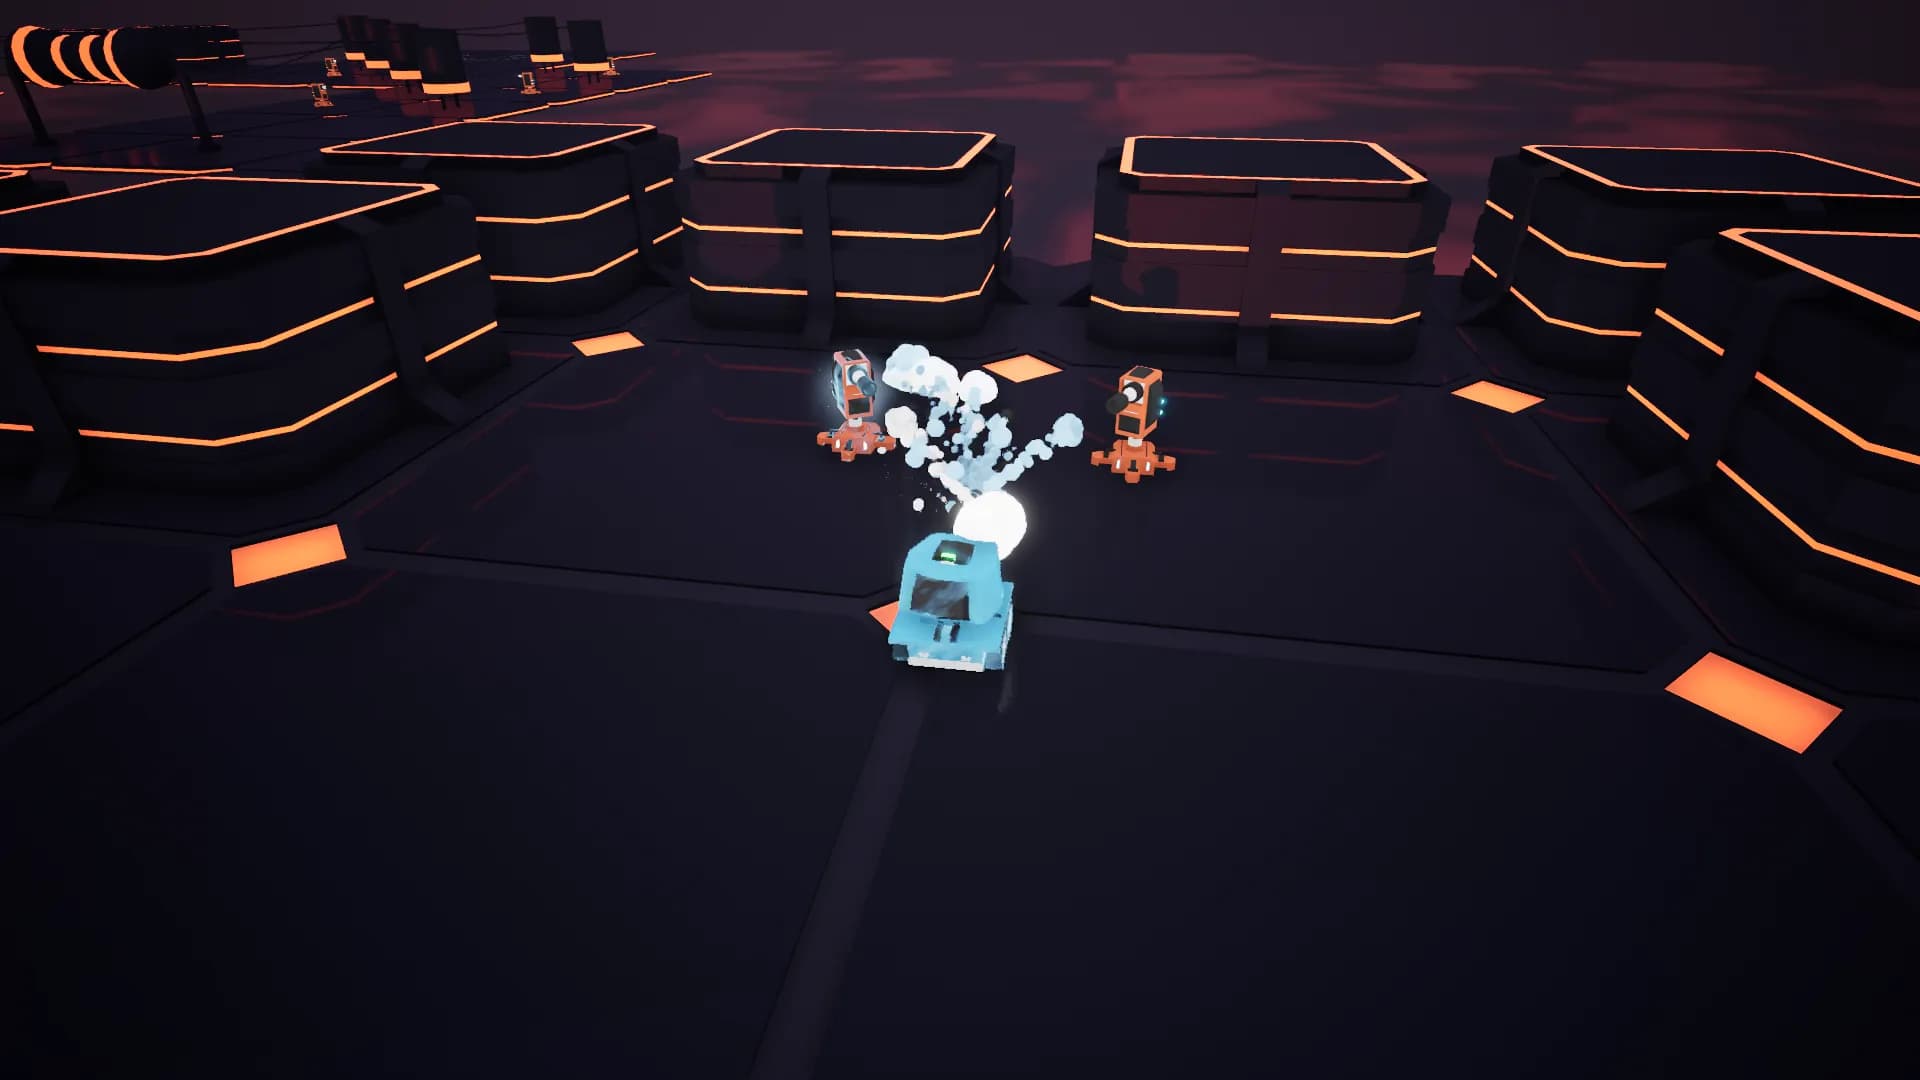 Screenshot 1: Tank shooting ice projectiles at the towers